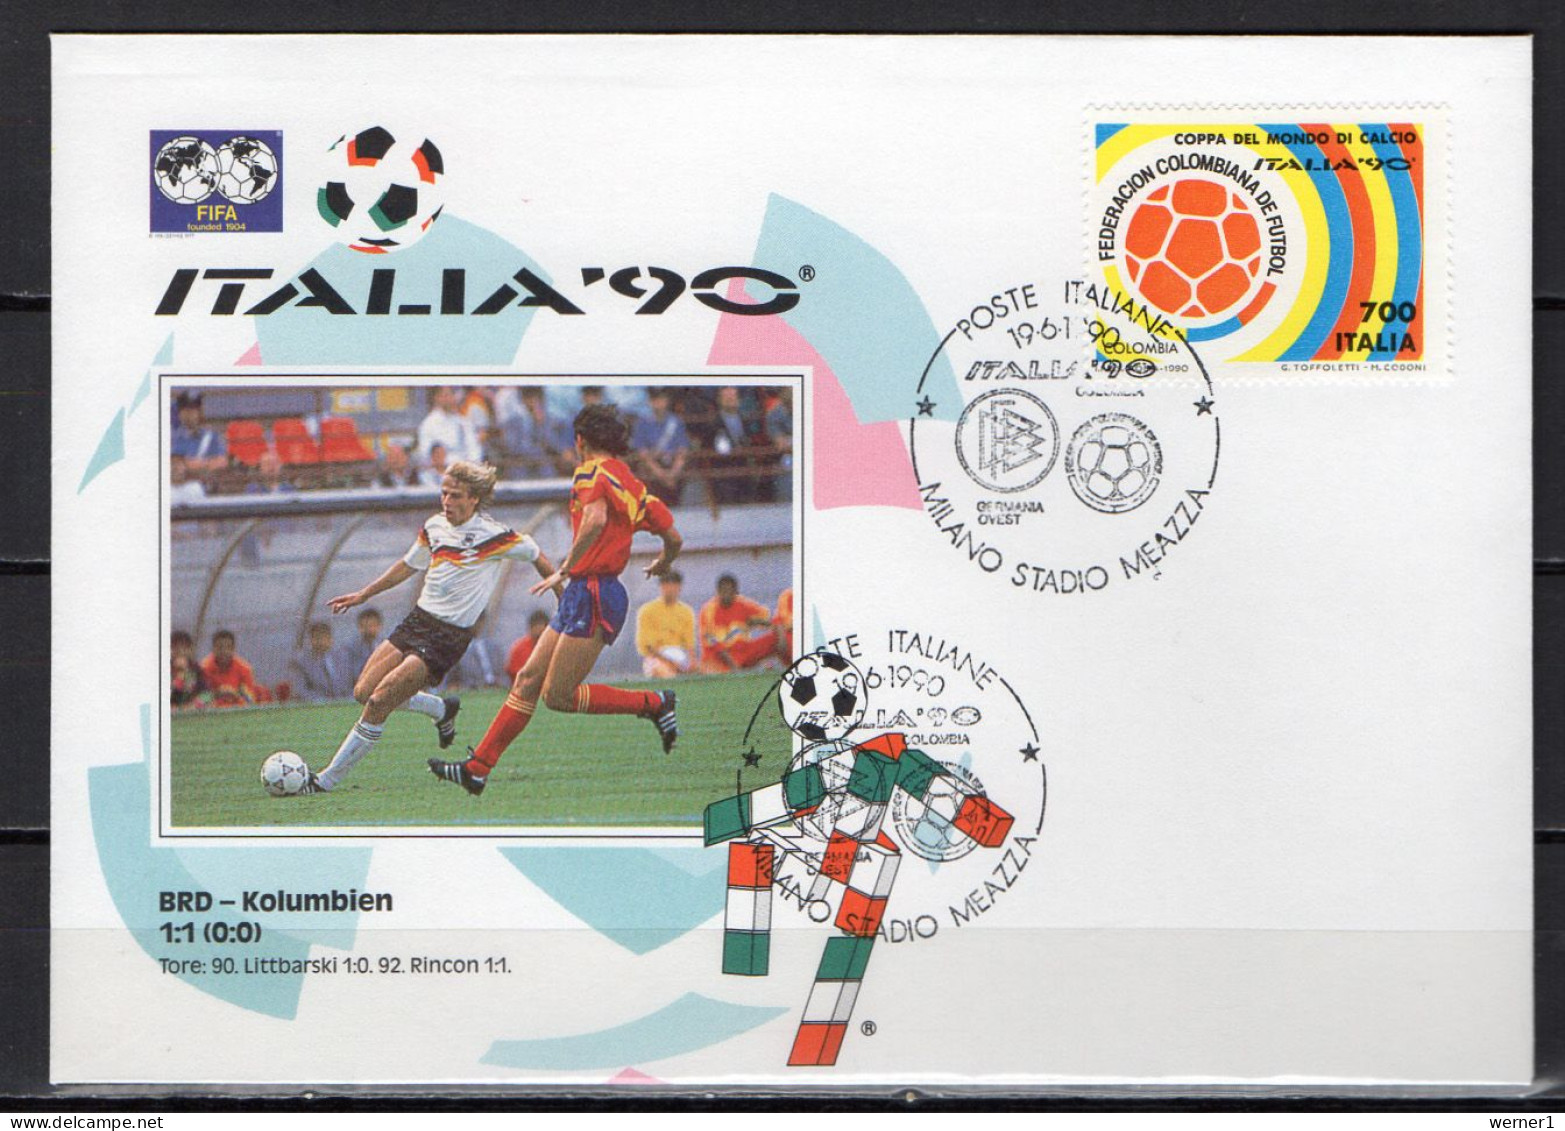 Italy 1990 Football Soccer World Cup Commemorative Cover Final Match Germany - Colombia 1 : 1 - 1990 – Italy